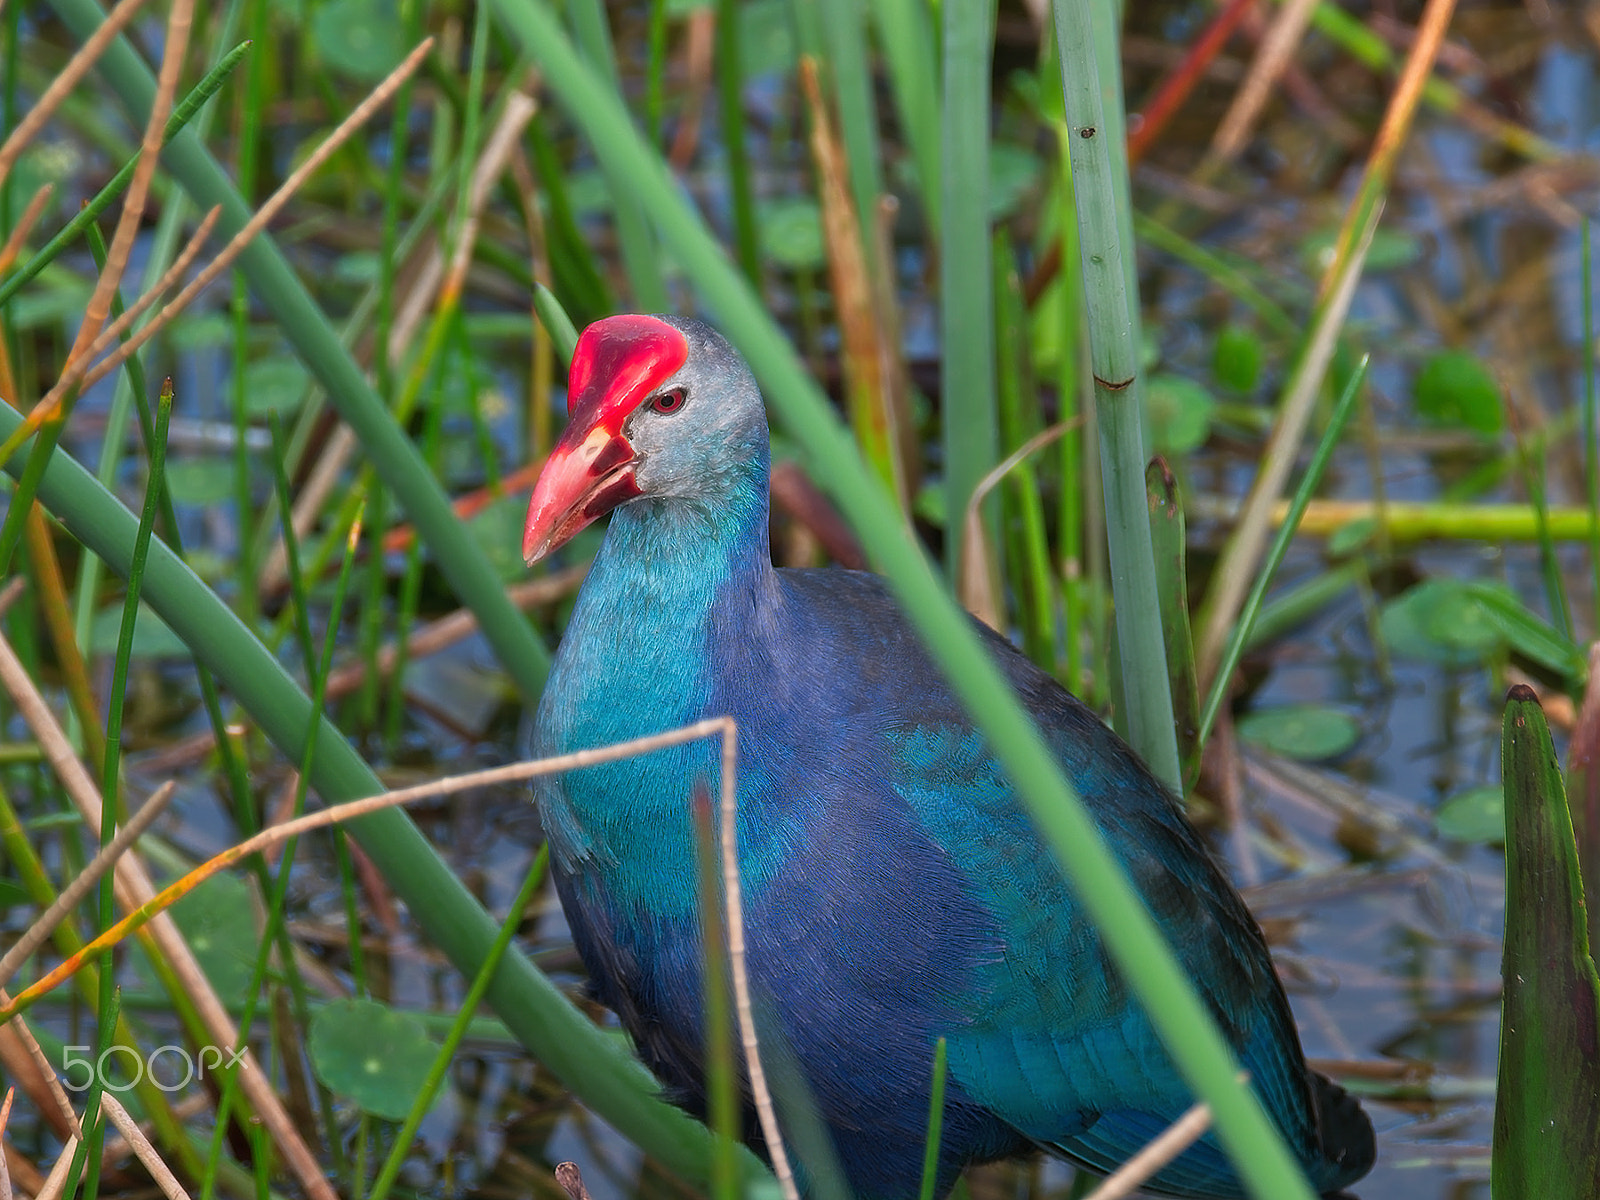 XF100-400mmF4.5-5.6 R LM OIS WR + 1.4x sample photo. Close up of purple gallinule photography